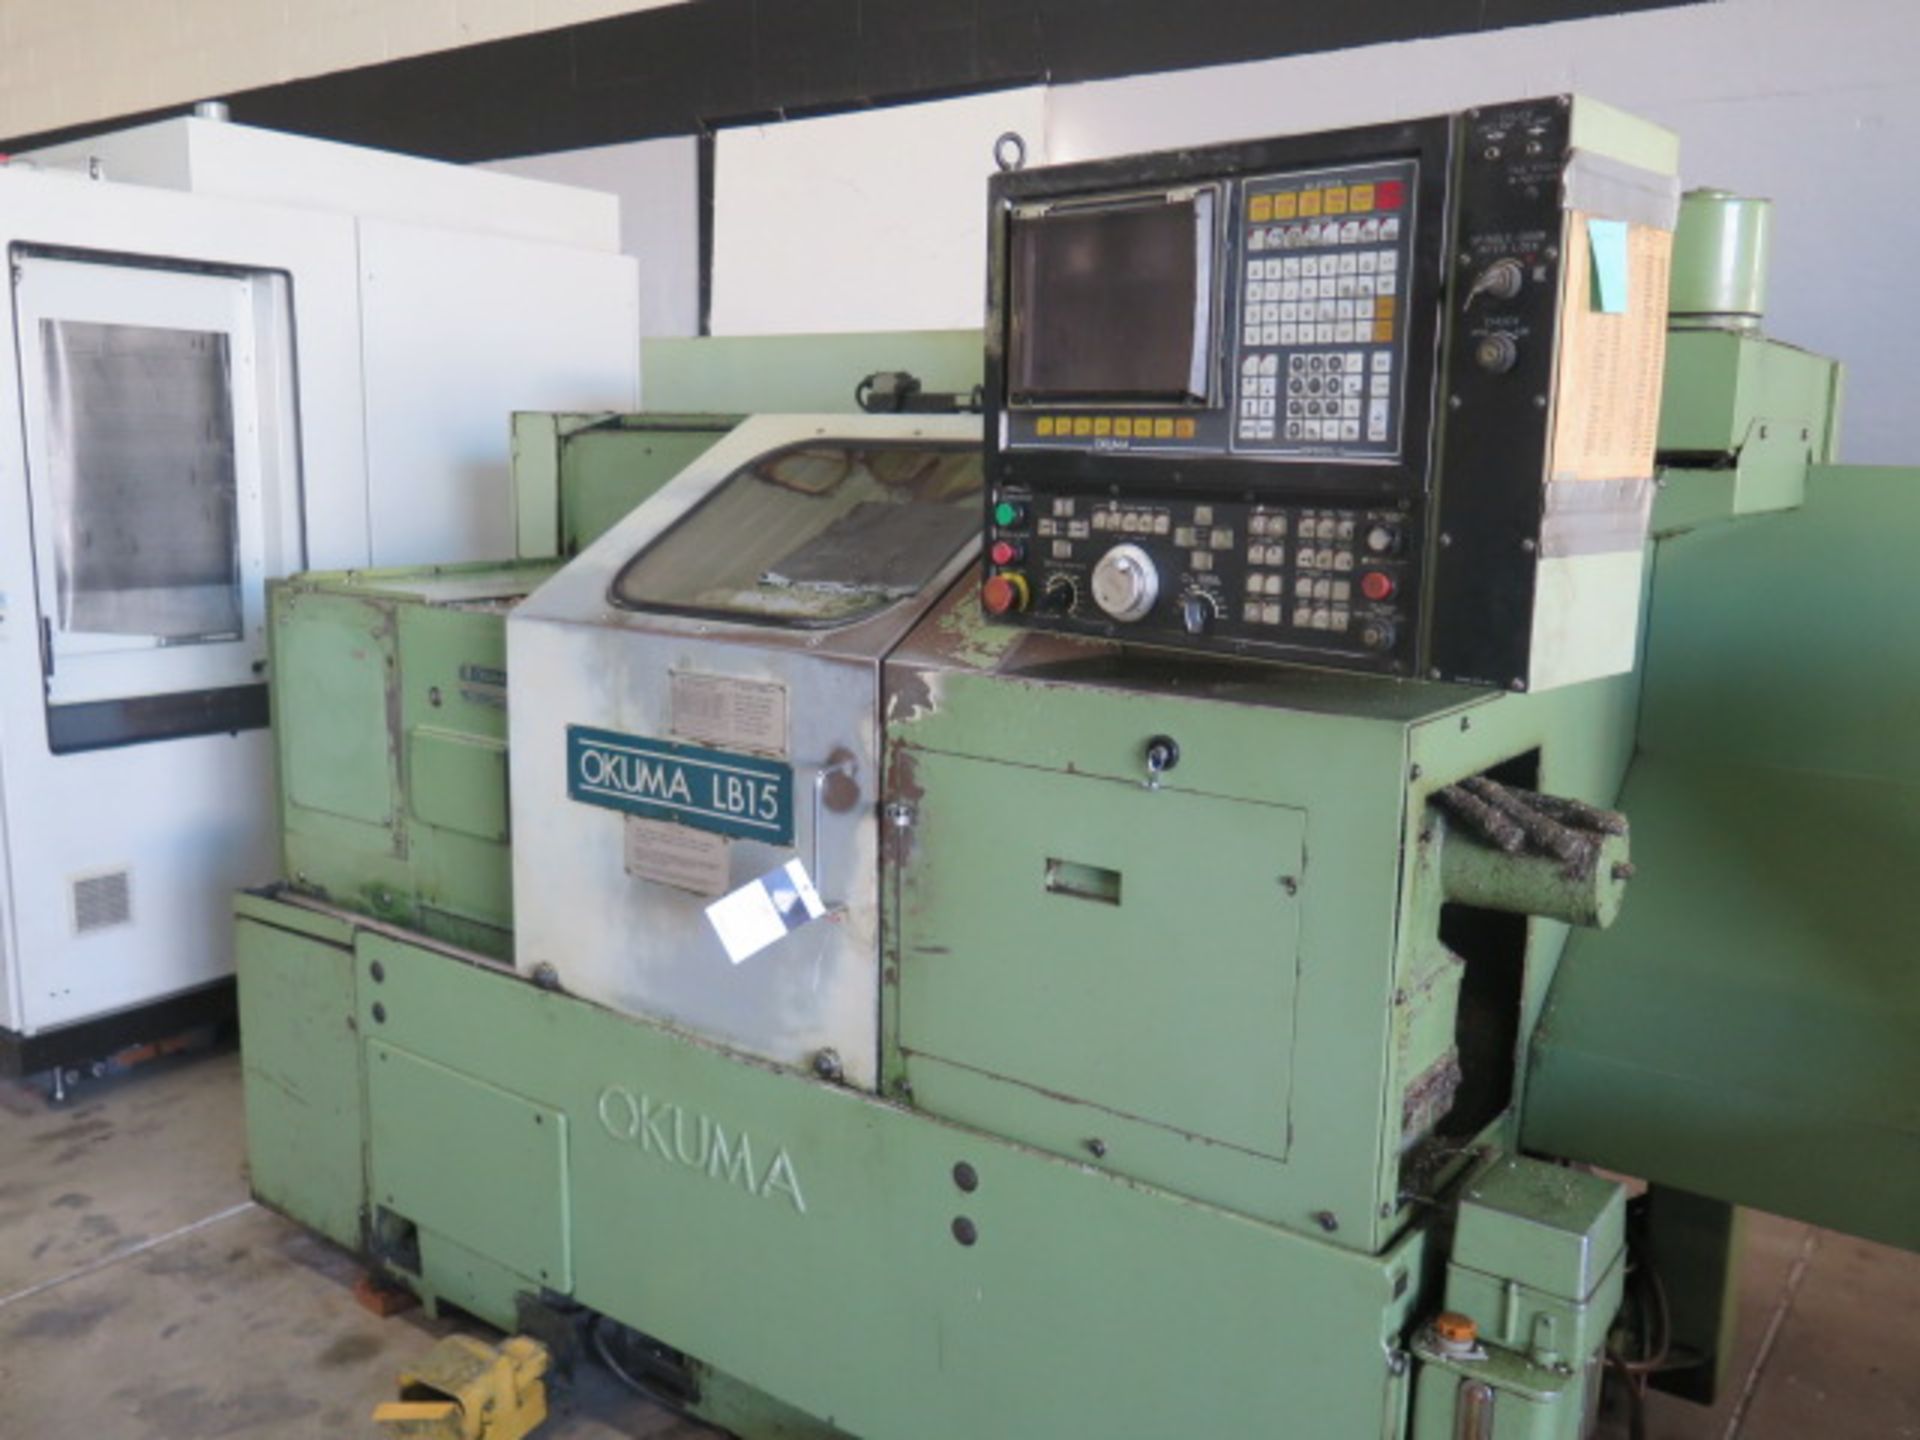 Okuma LB15 CNC Turning Center s/n 9282 w/ OSP5000 L-G Controls, 12-Station Turret, SOLD AS IS - Image 2 of 12